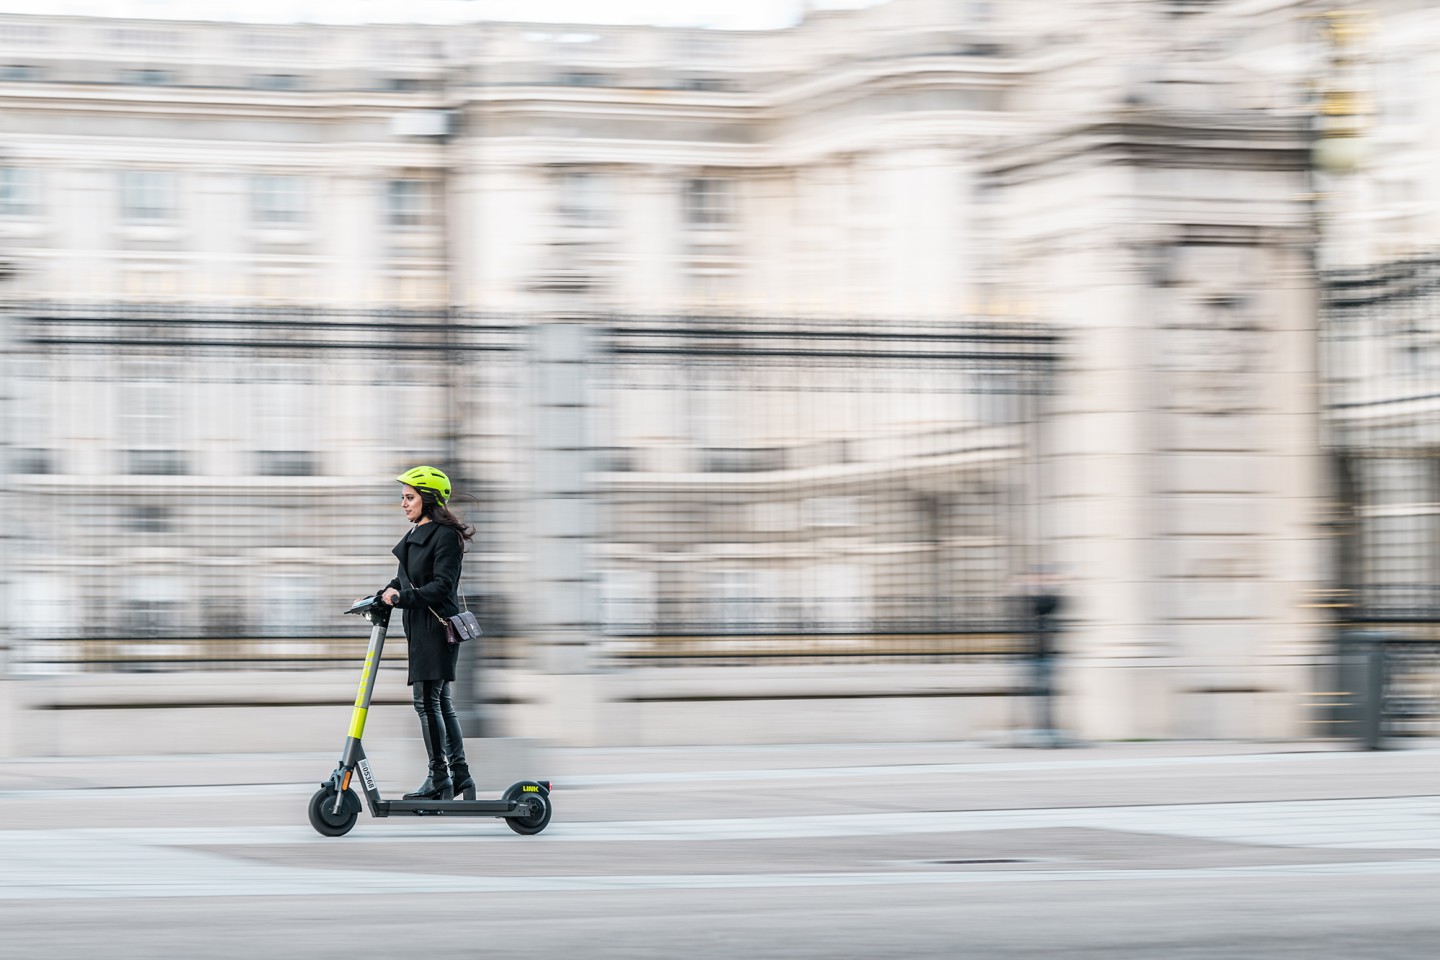 There's no word on whether or not Pedestrian Defense will eventually be licensed to other e-scooter sharing services